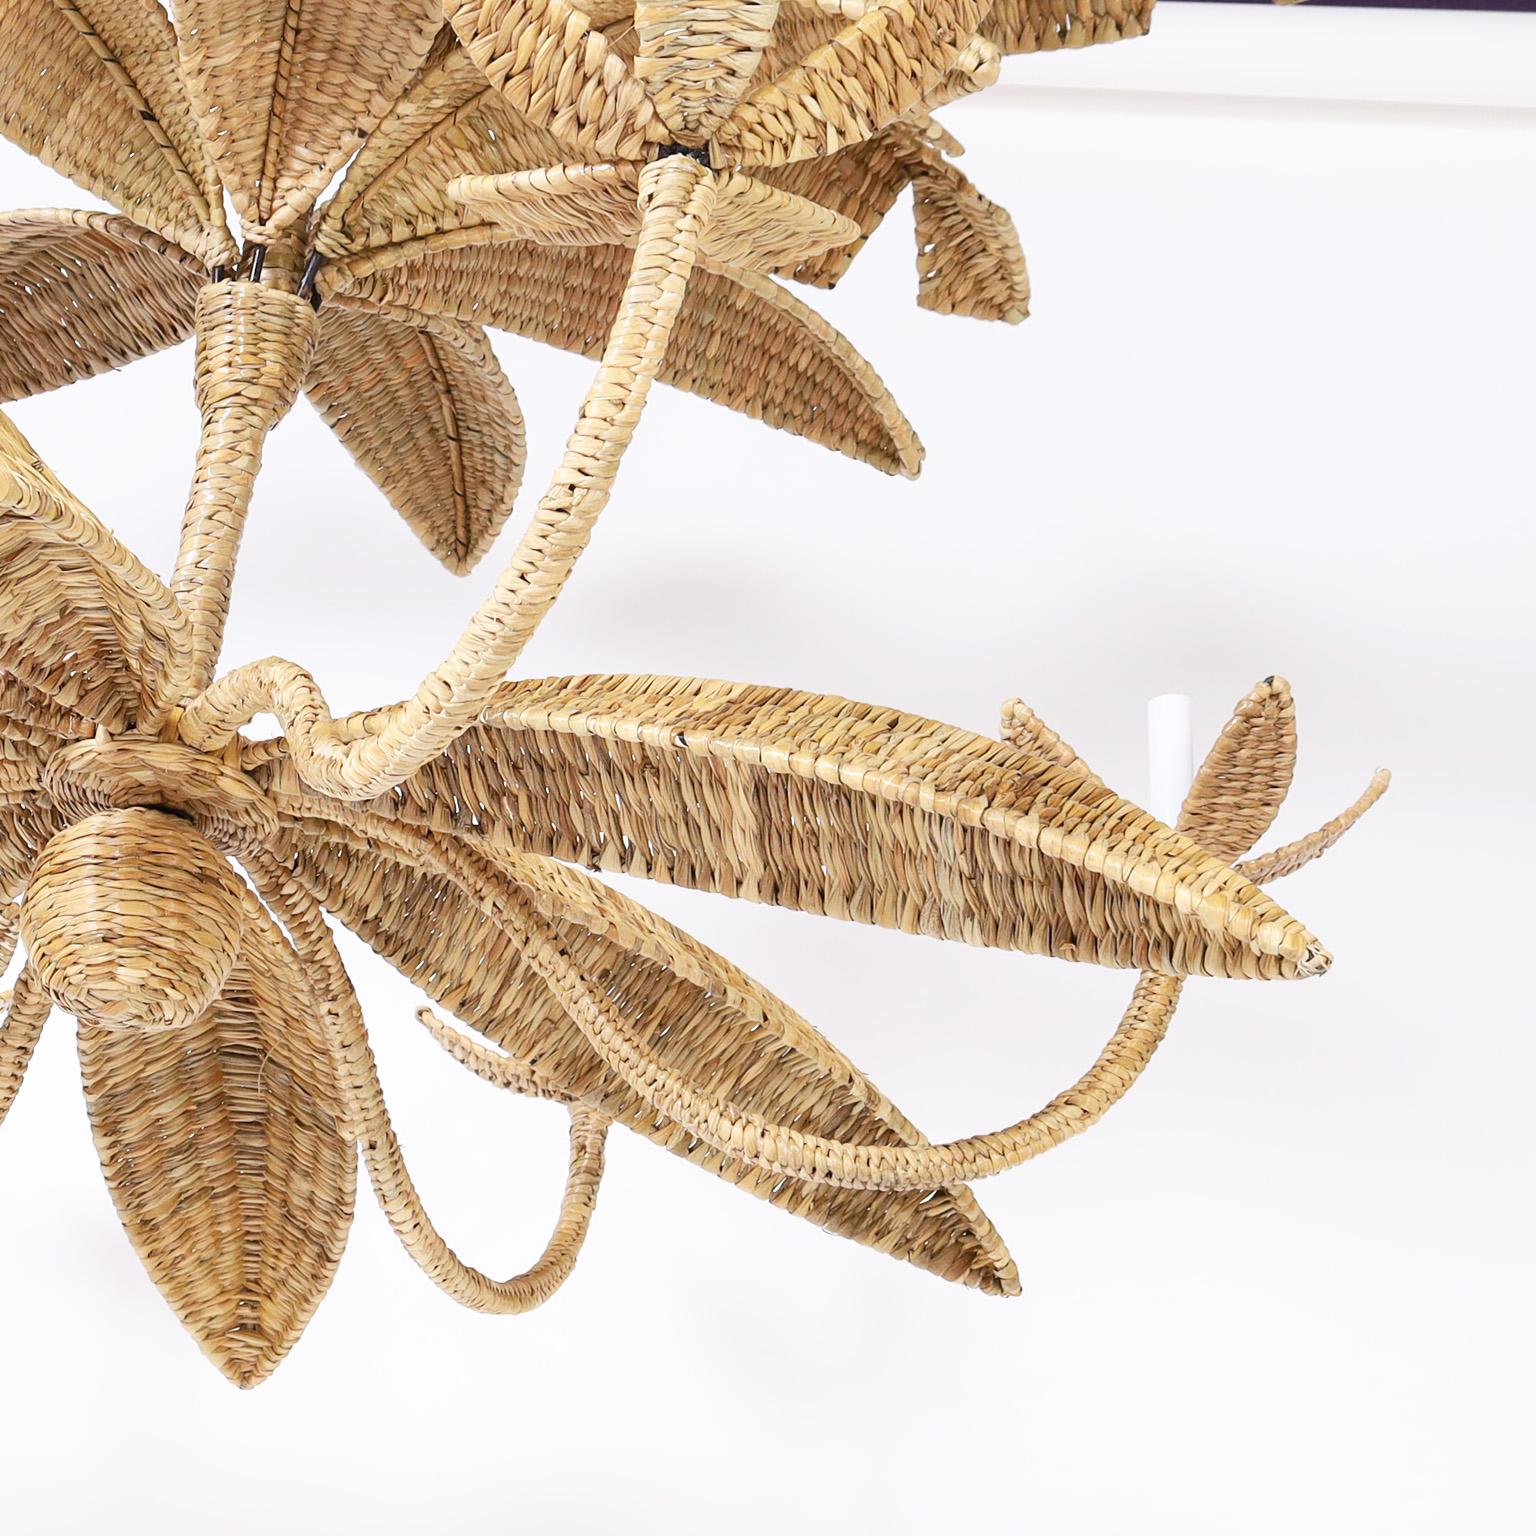 Contemporary The Lola Wicker Palm Leaf Chandelier from the FS Flores Collection